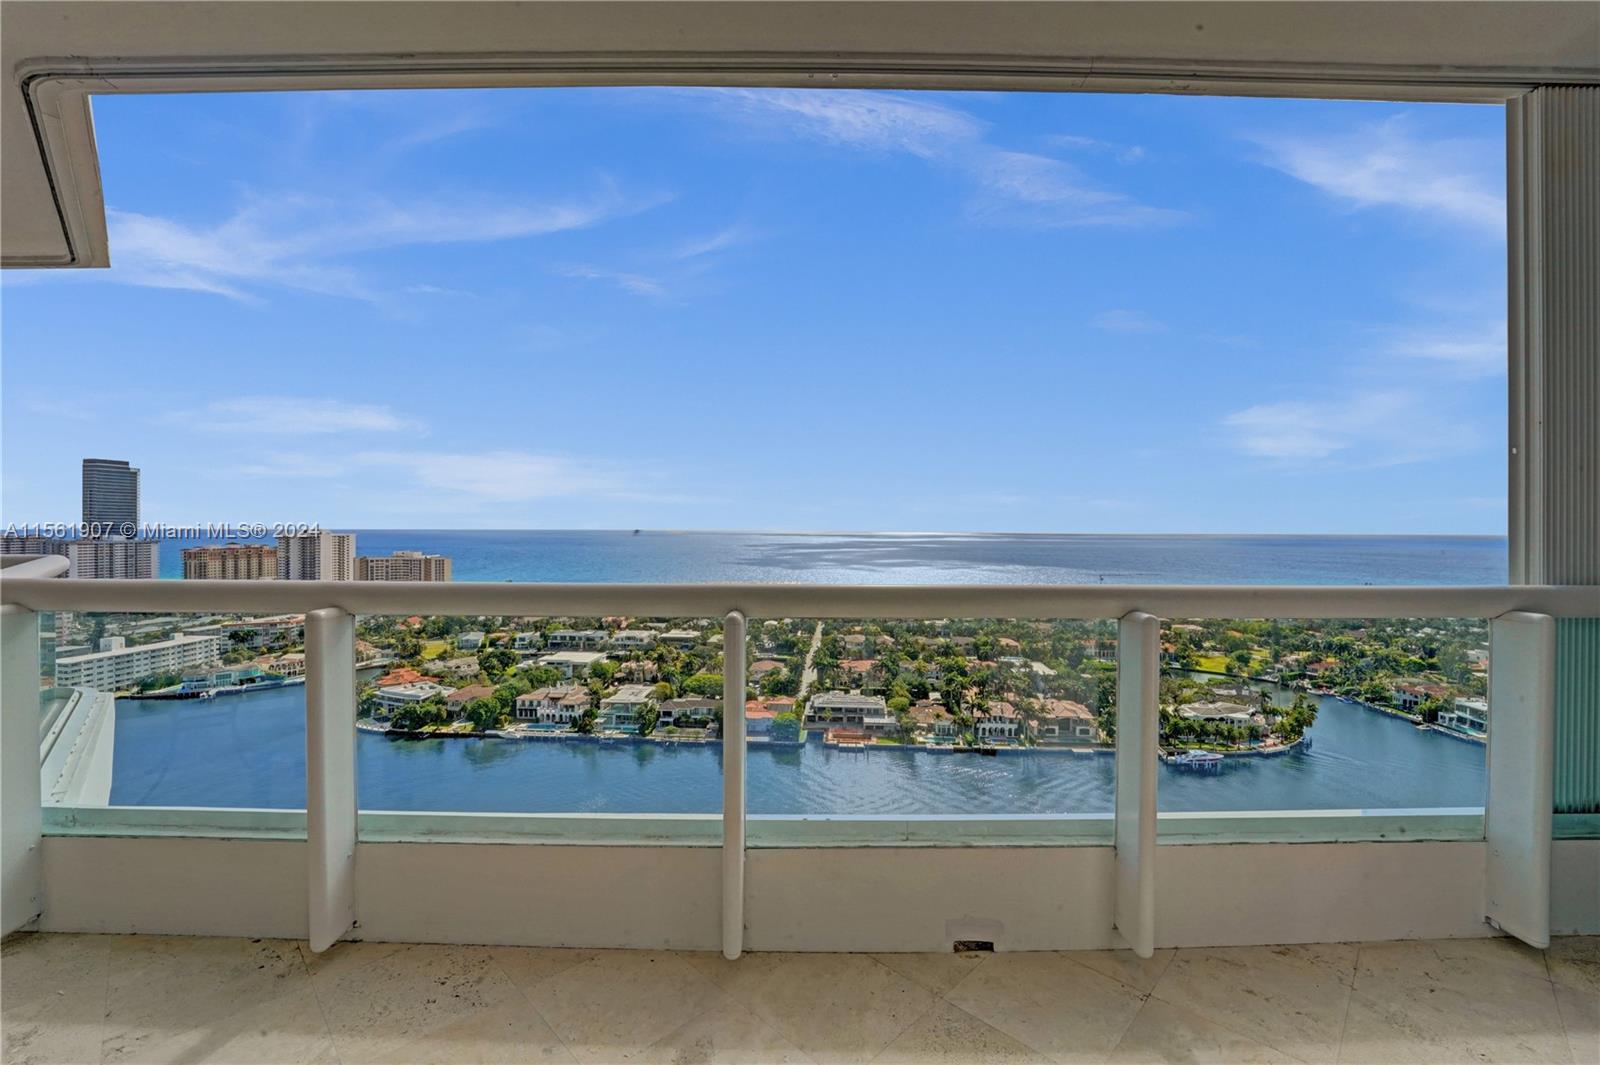 One of the best floorplans in Aventura! Direct Ocean View! This flow-thru apartment has panoramic views of the Intracoastal, and the ocean. Bright & spacious. 3 bedrooms & 3.5 baths. Updated Eat-in kitchen and a full-size laundry room. Large master bedroom.  Two balconies. 2 garage parking spaces. Recently renovated lobby with 24-hour security and valet.   Great amenities included in the maintenance: 25,000 sf spa & fitness center with an outdoor cafe, 3 pools, tennis courts, BBQ area & kids’ playground. Walking distance to restaurants and shops.